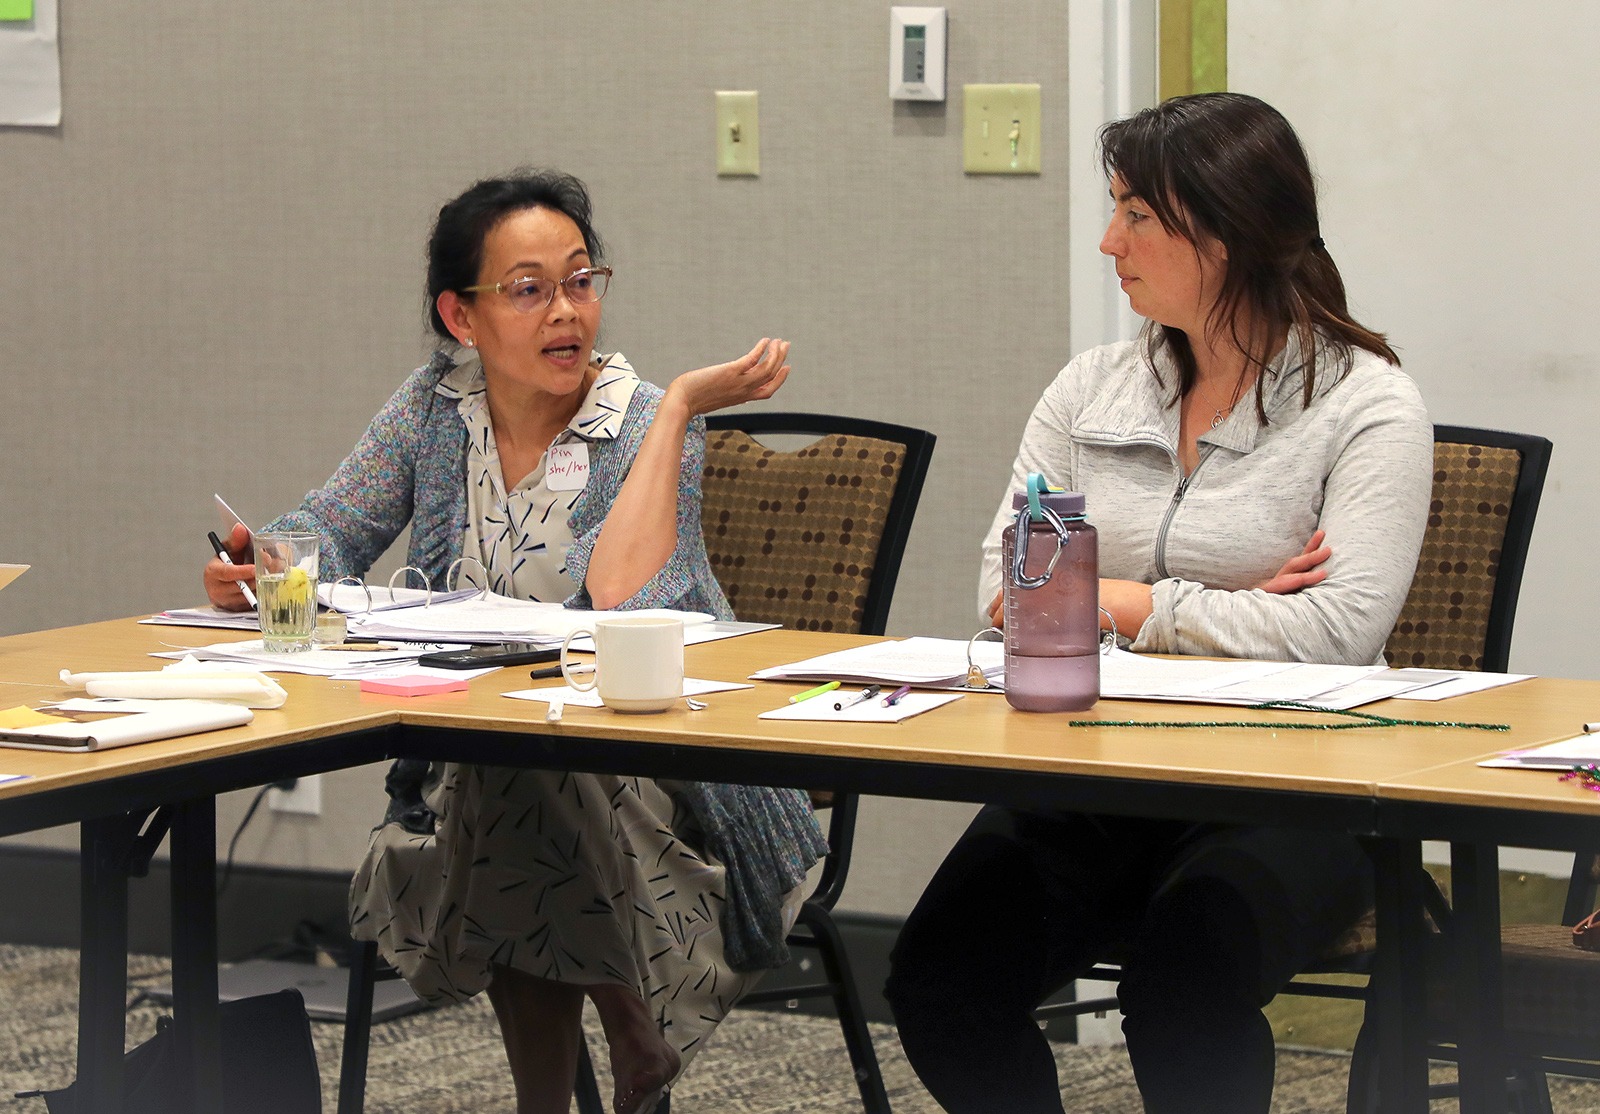 Two members of the HEZ Evaluation Team sit at a table with office materials while in discussion.